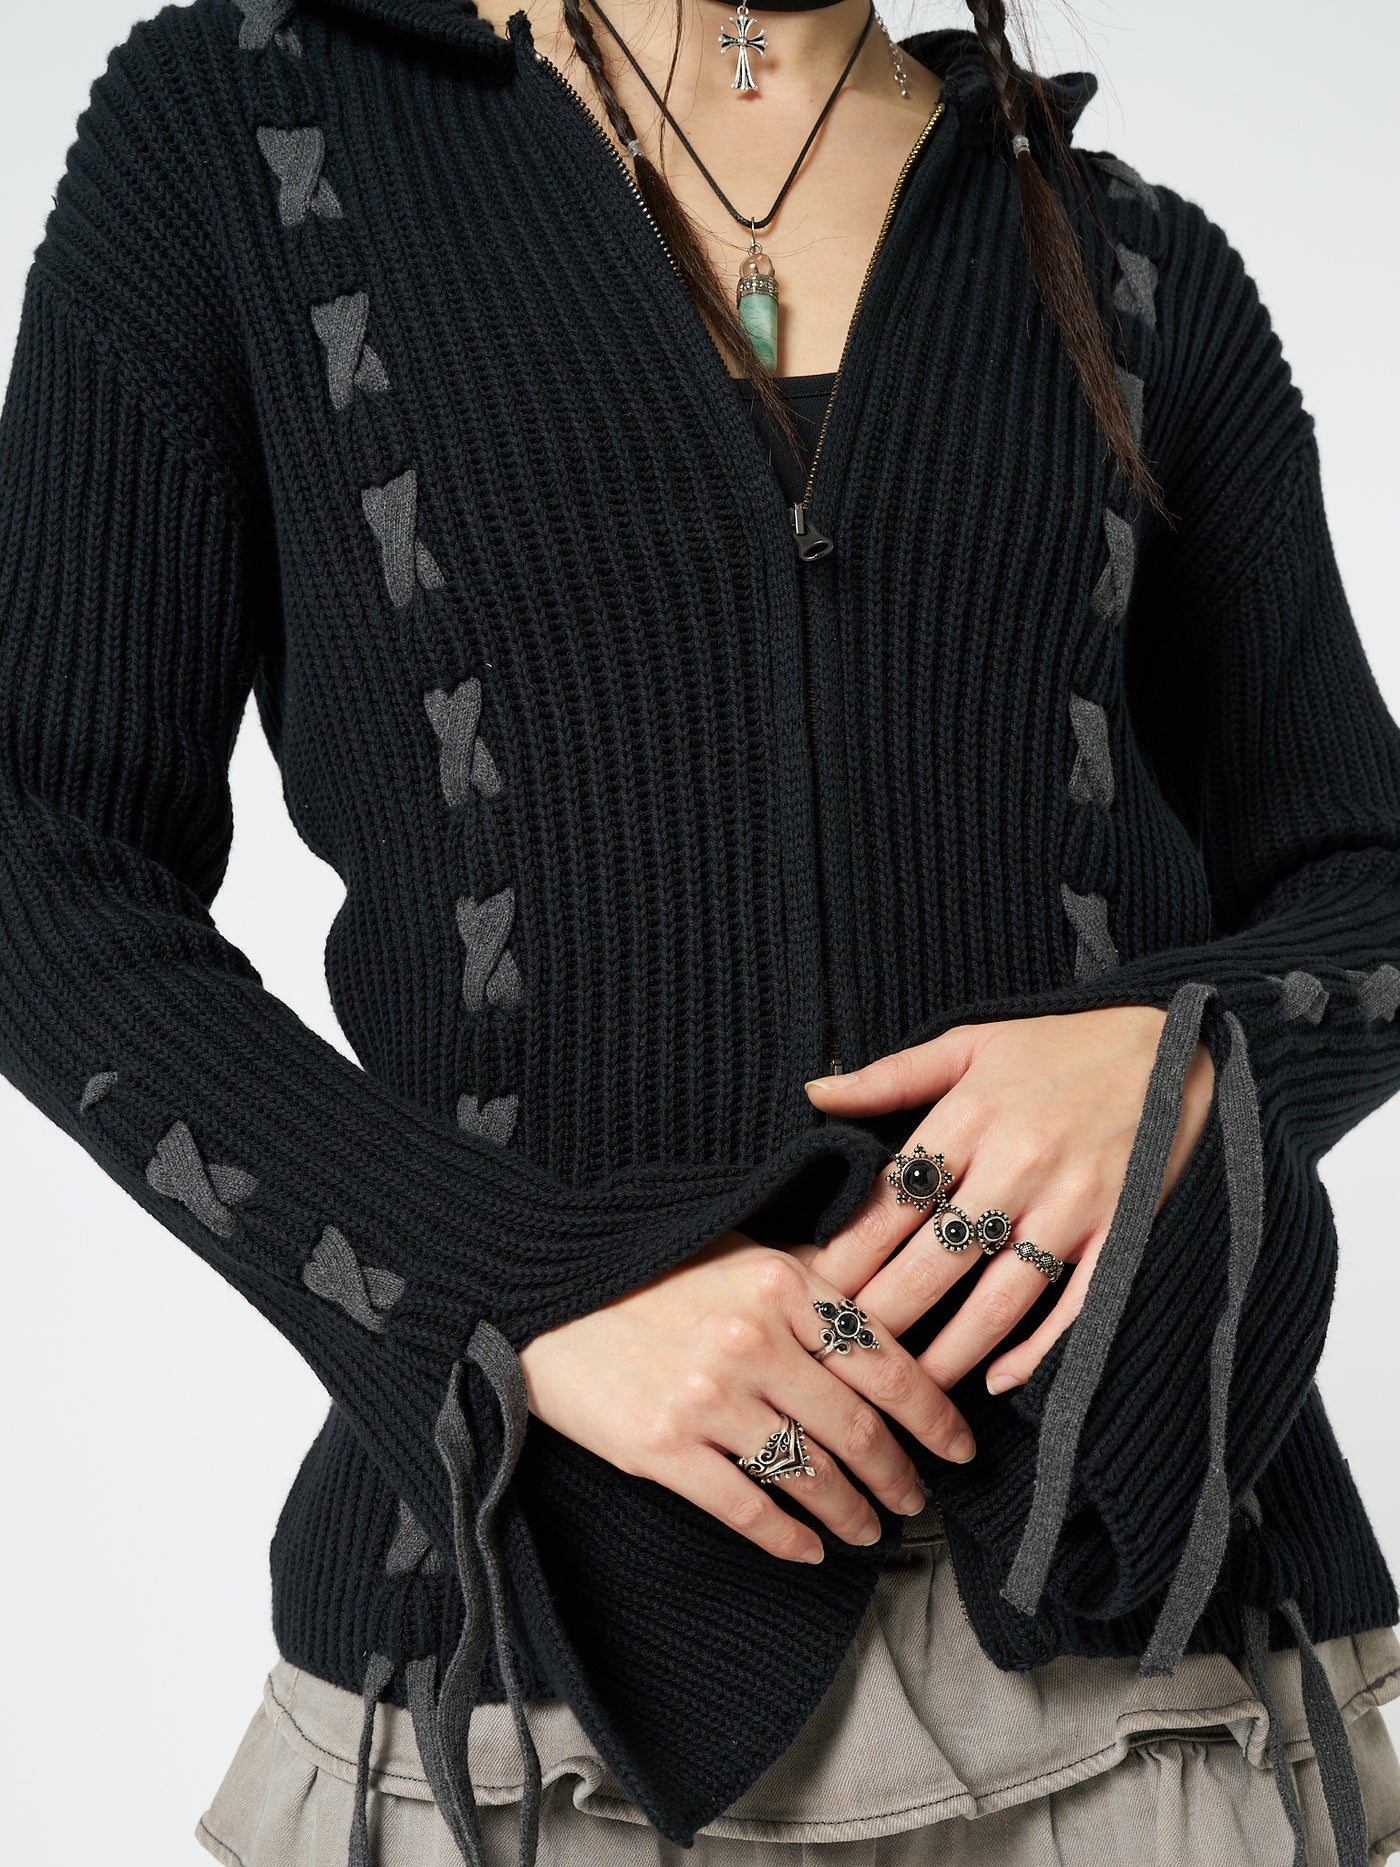 This black lace-up hoodie cardigan combines comfort and style effortlessly. The lace-up detailing adds a trendy touch to the classic hoodie design, making it a versatile and fashionable piece for any casual outfit.